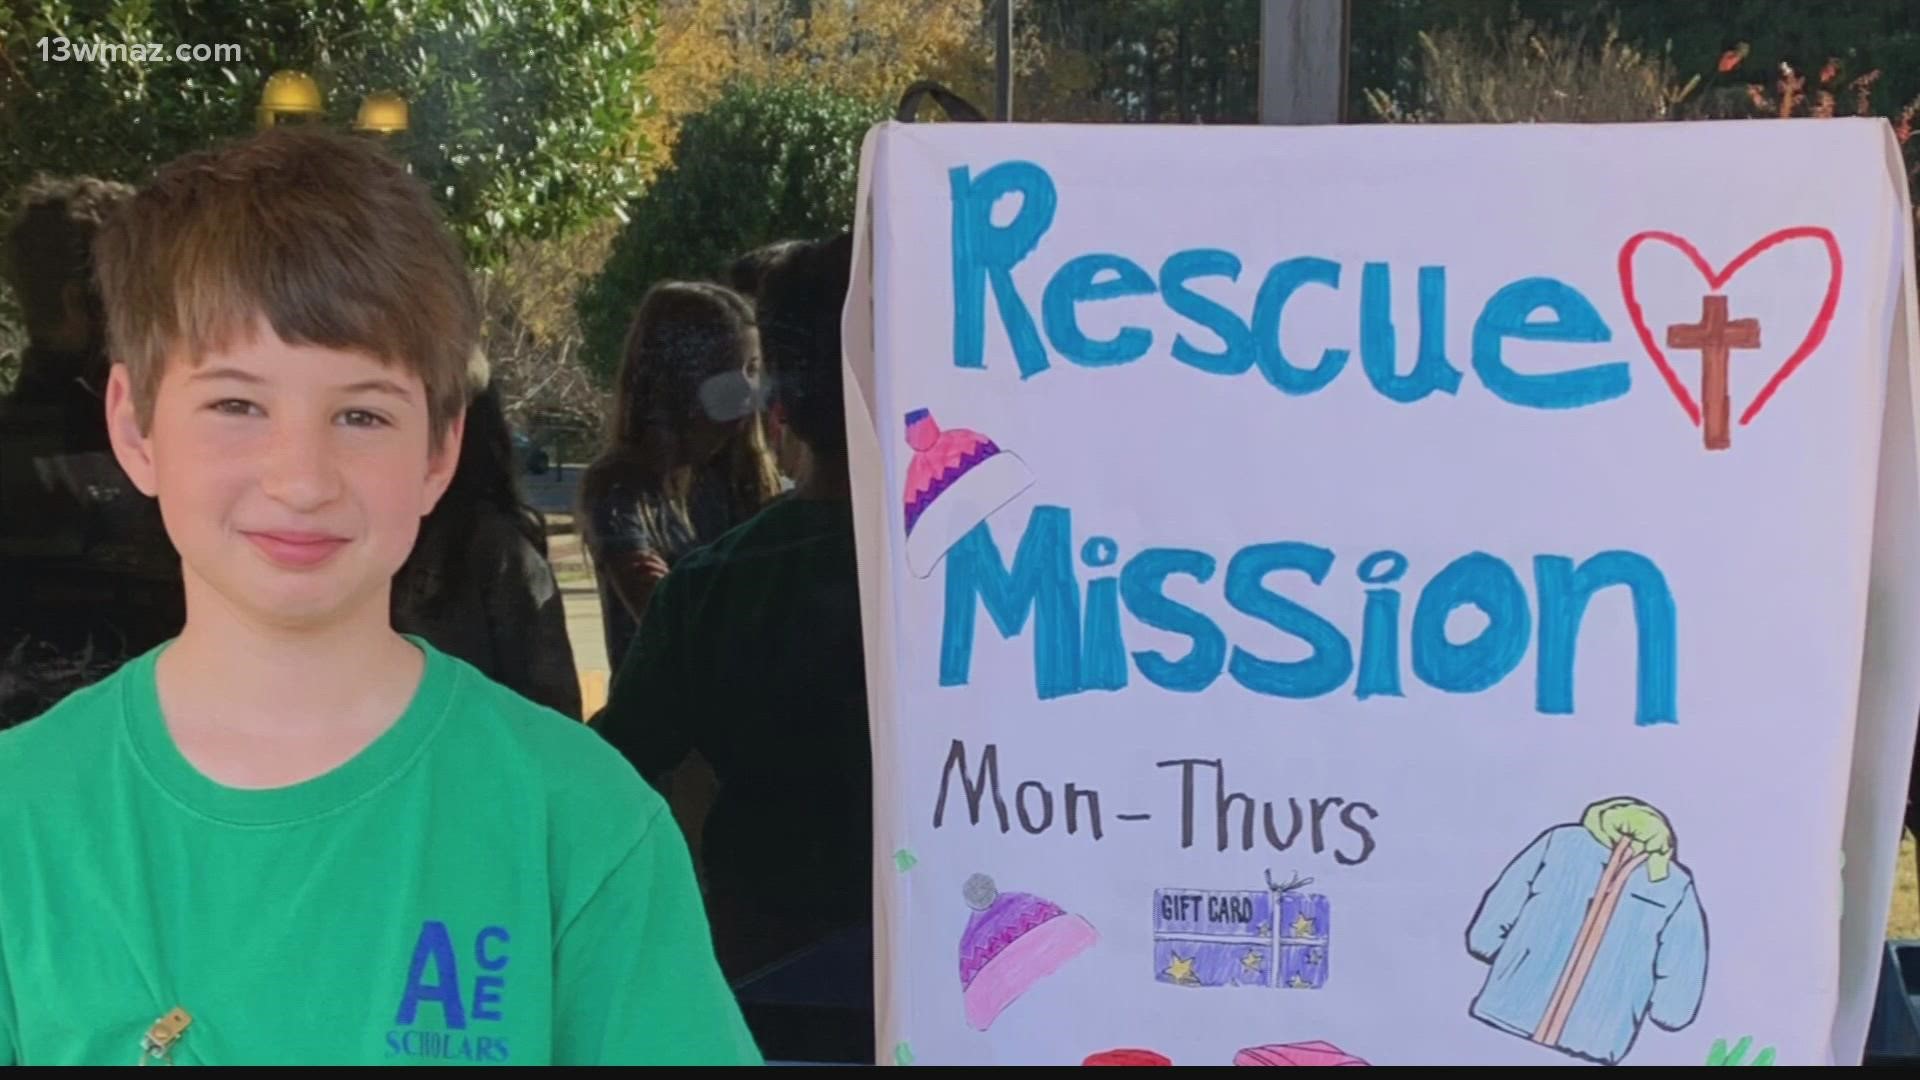 Caleb Goss and his classmates collected hundreds of items to donate to the Middle Georgia Rescue Mission.